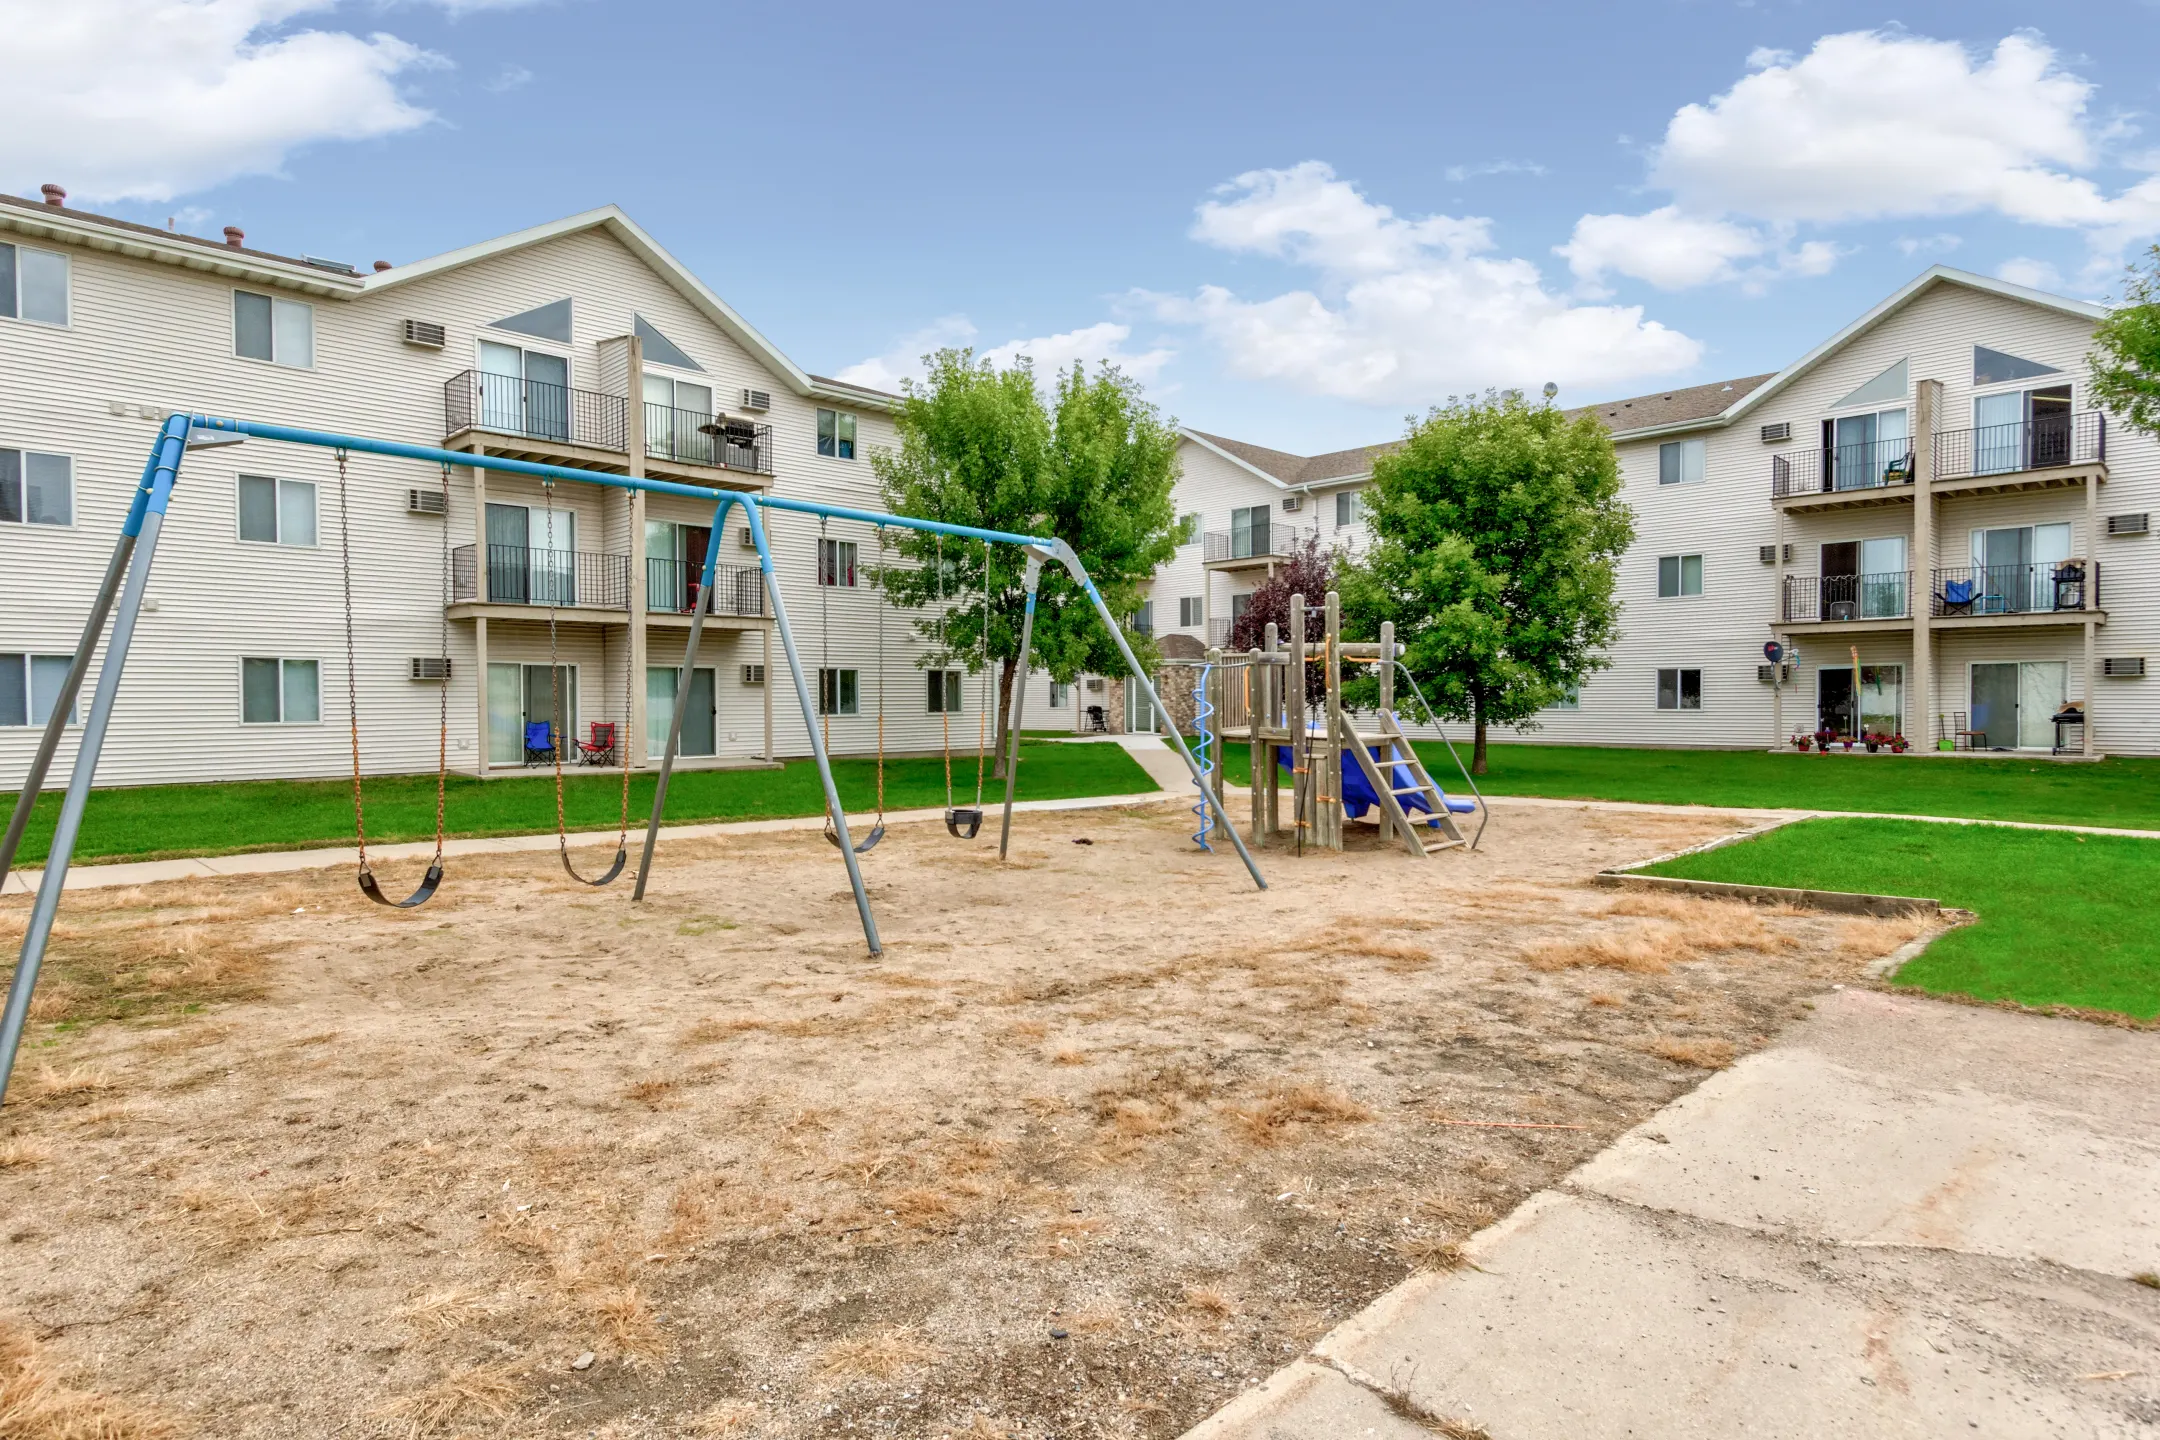 Playground - Wheatland Place Apartments & Townhomes - Fargo, ND